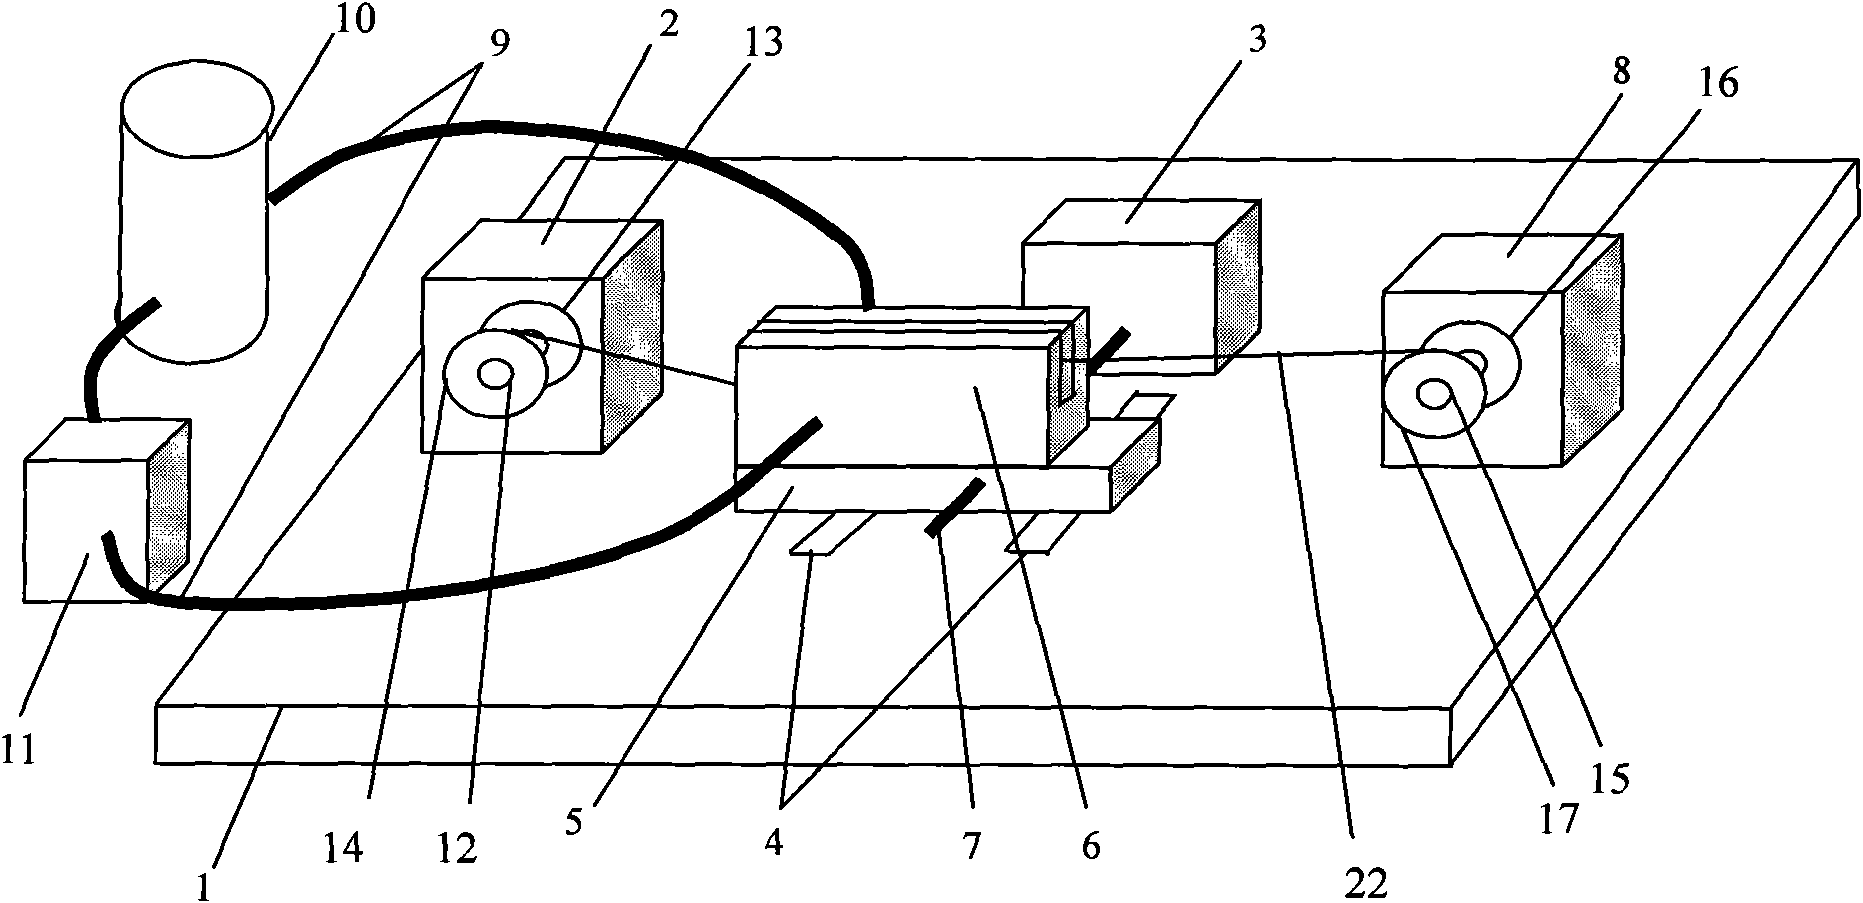 Device for continuously removing optical fiber coating and winding bare fiber